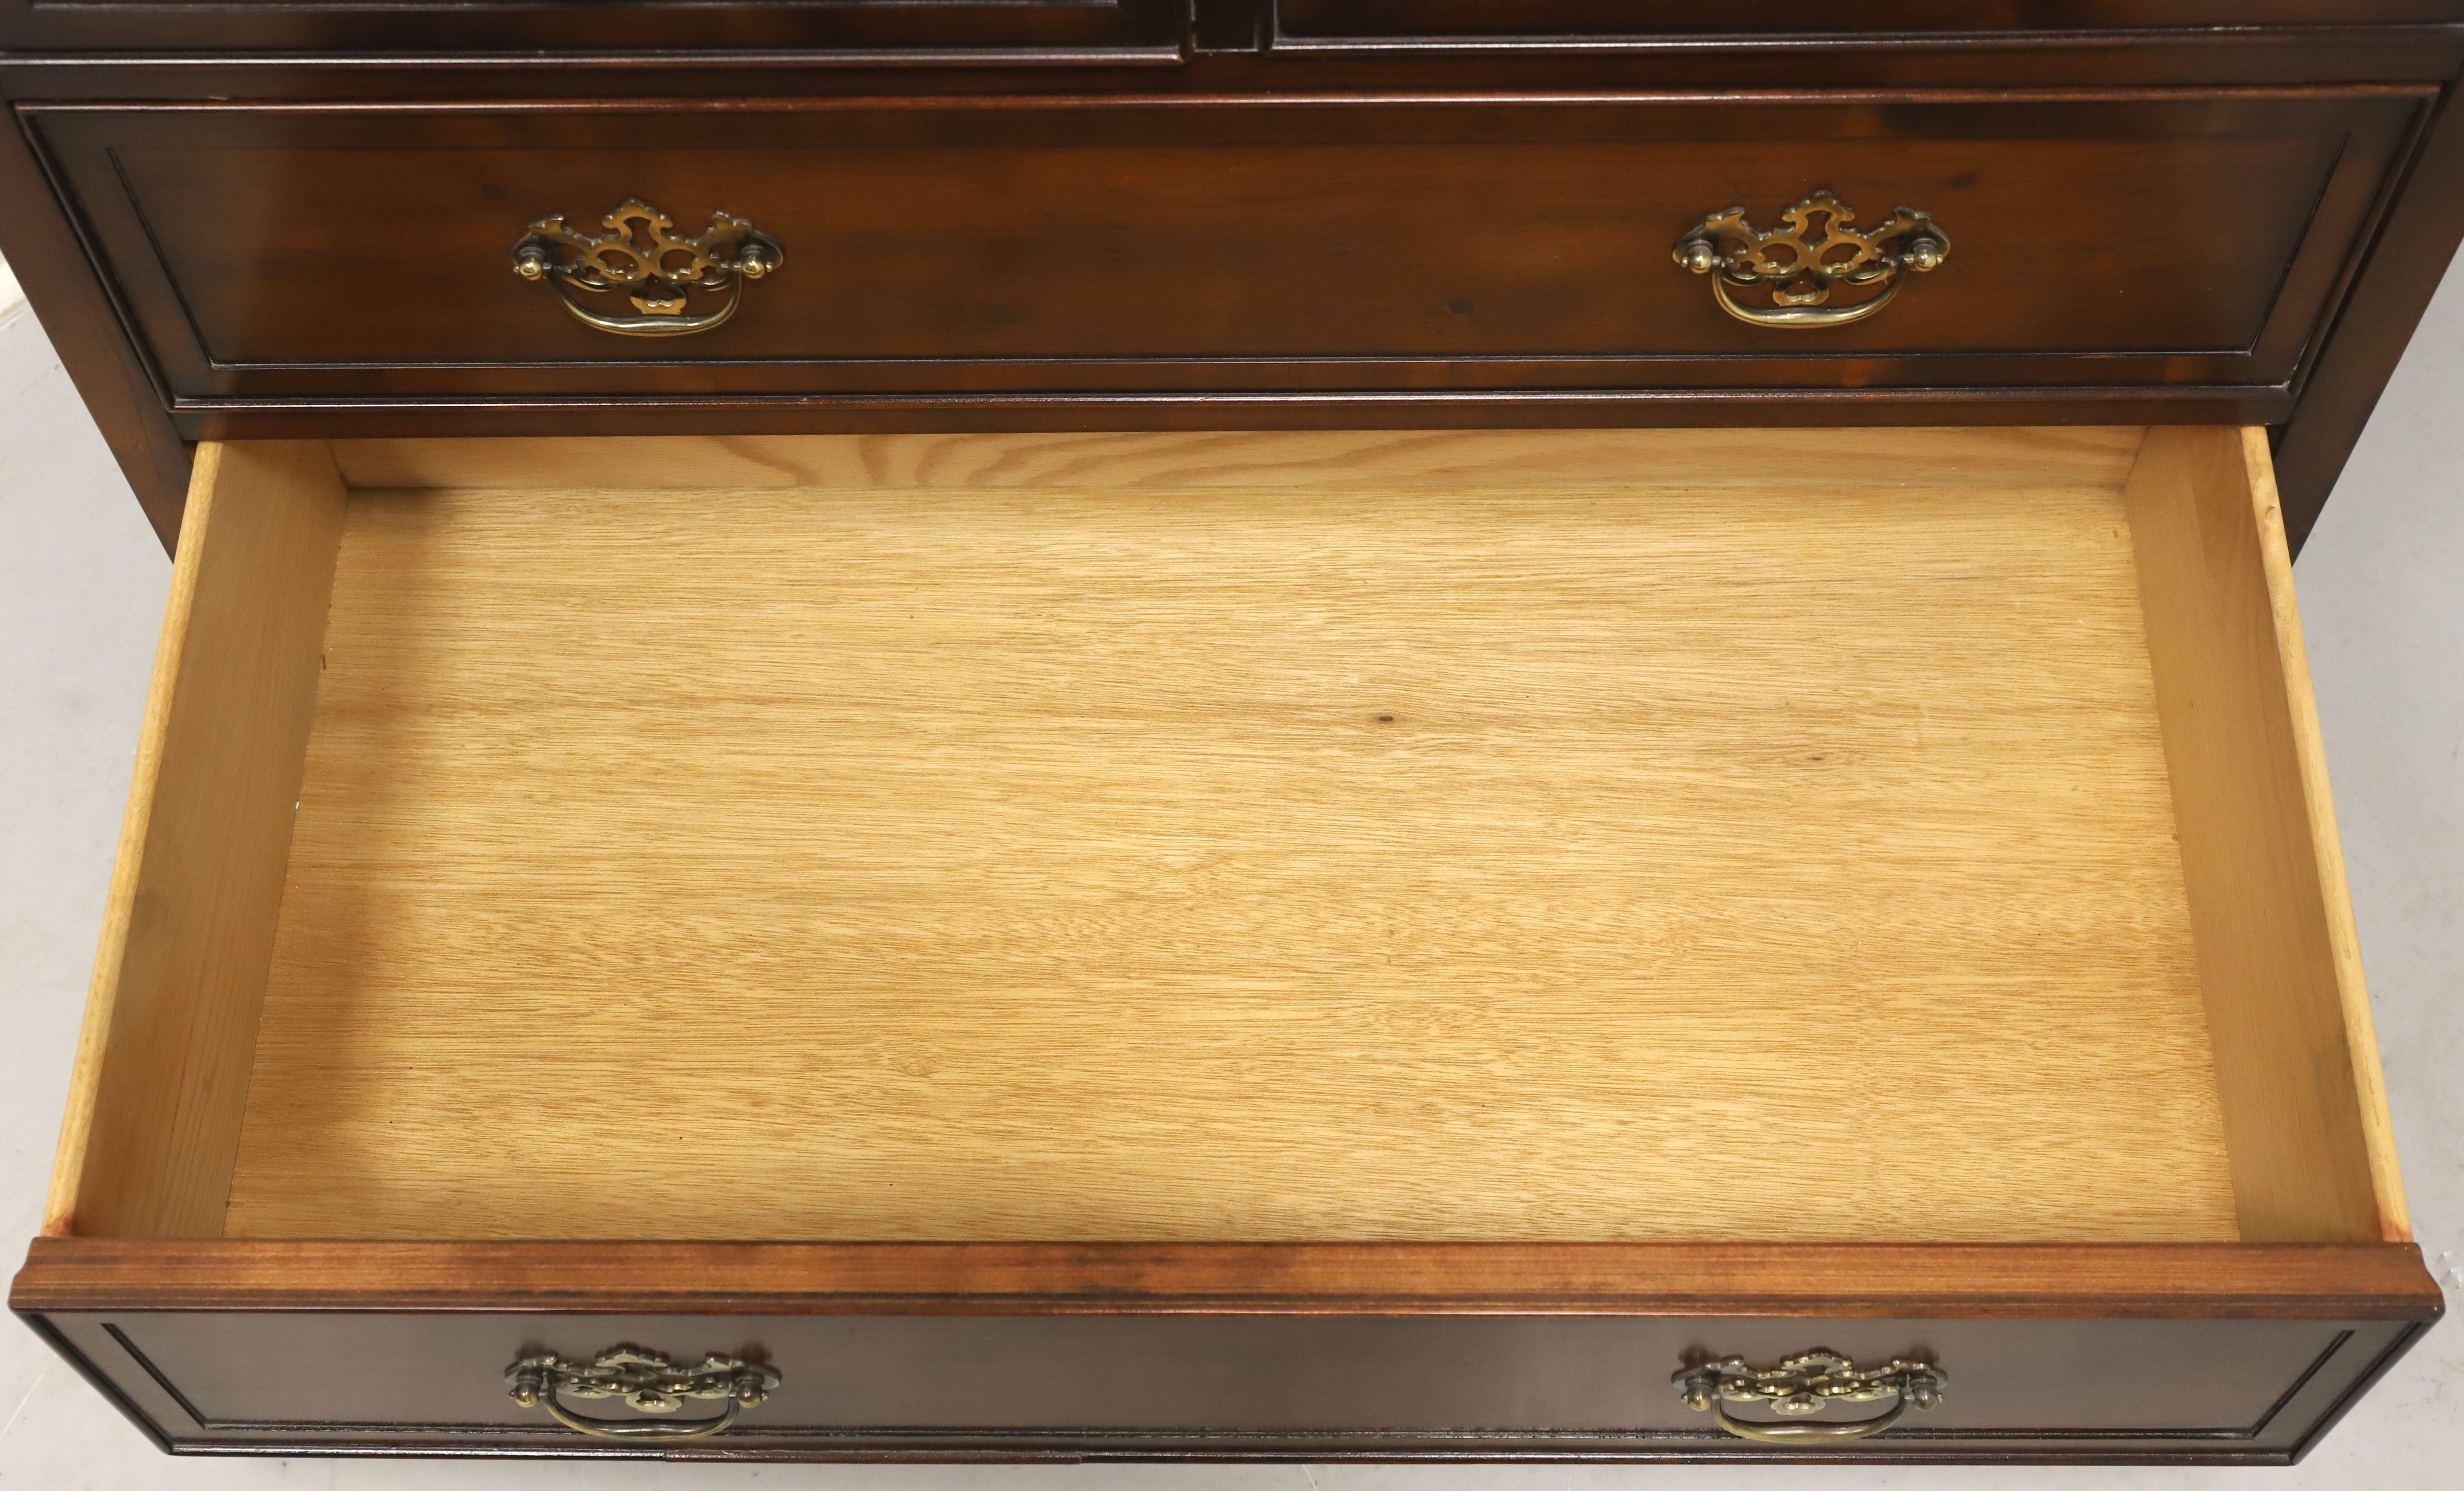 HEKMAN Inlaid Yew Wood Entertainment Cabinet Chest For Sale 1